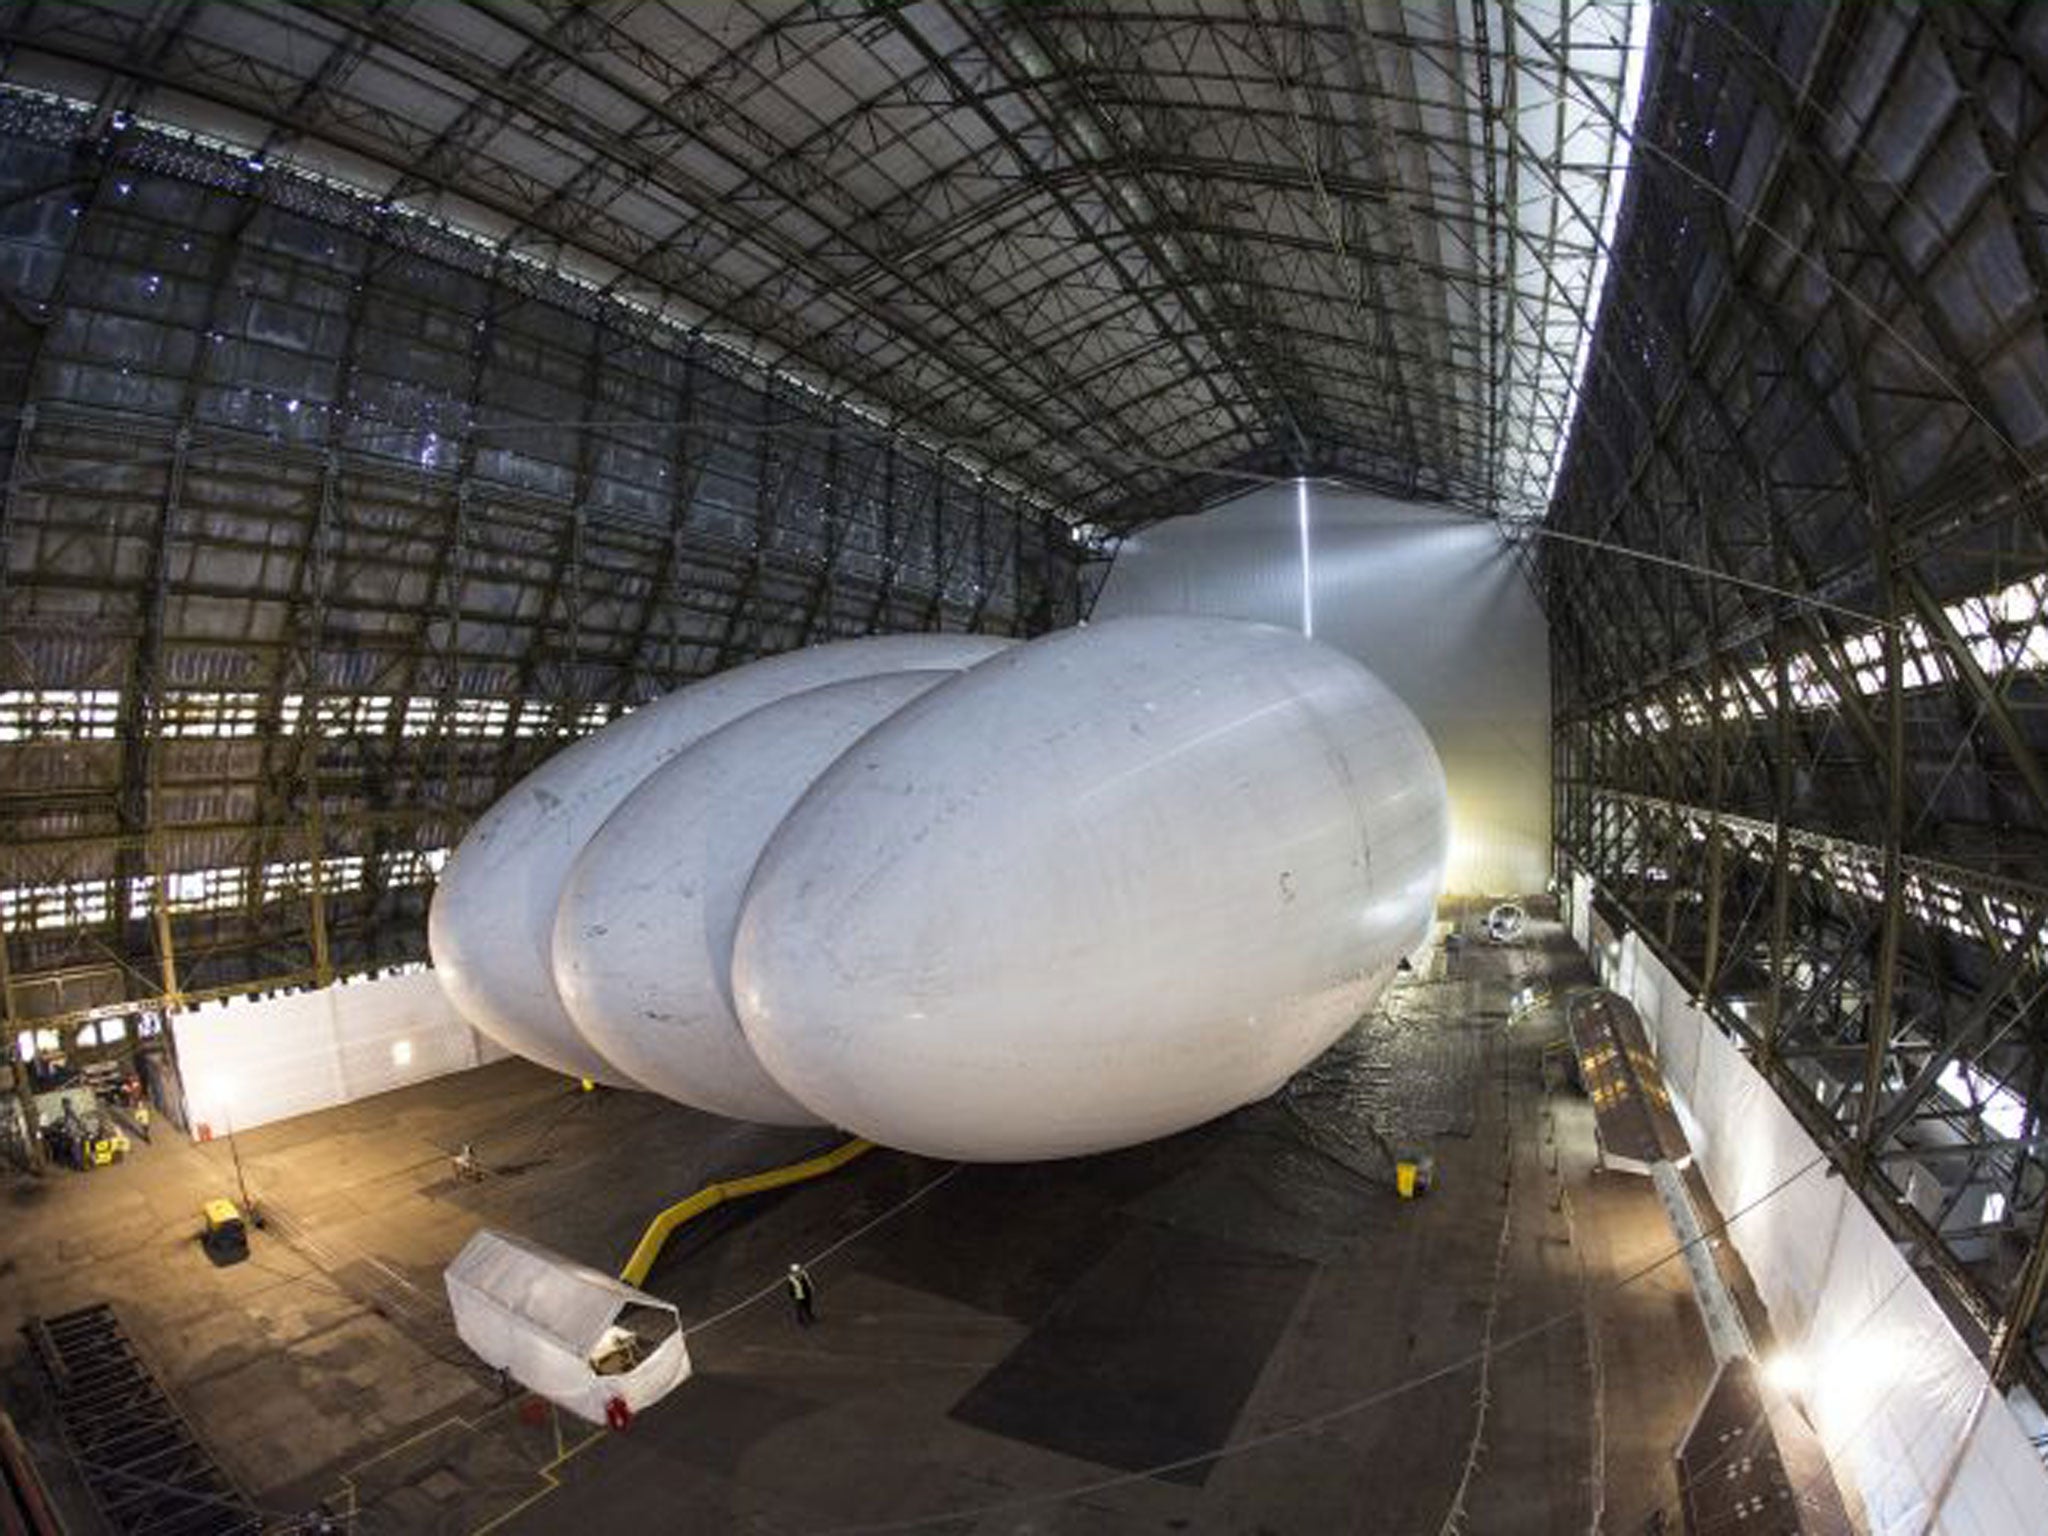 The Airlander, which was originally developed for the US military before the project was cancelled due to budget cuts, is the world's longest aircraft